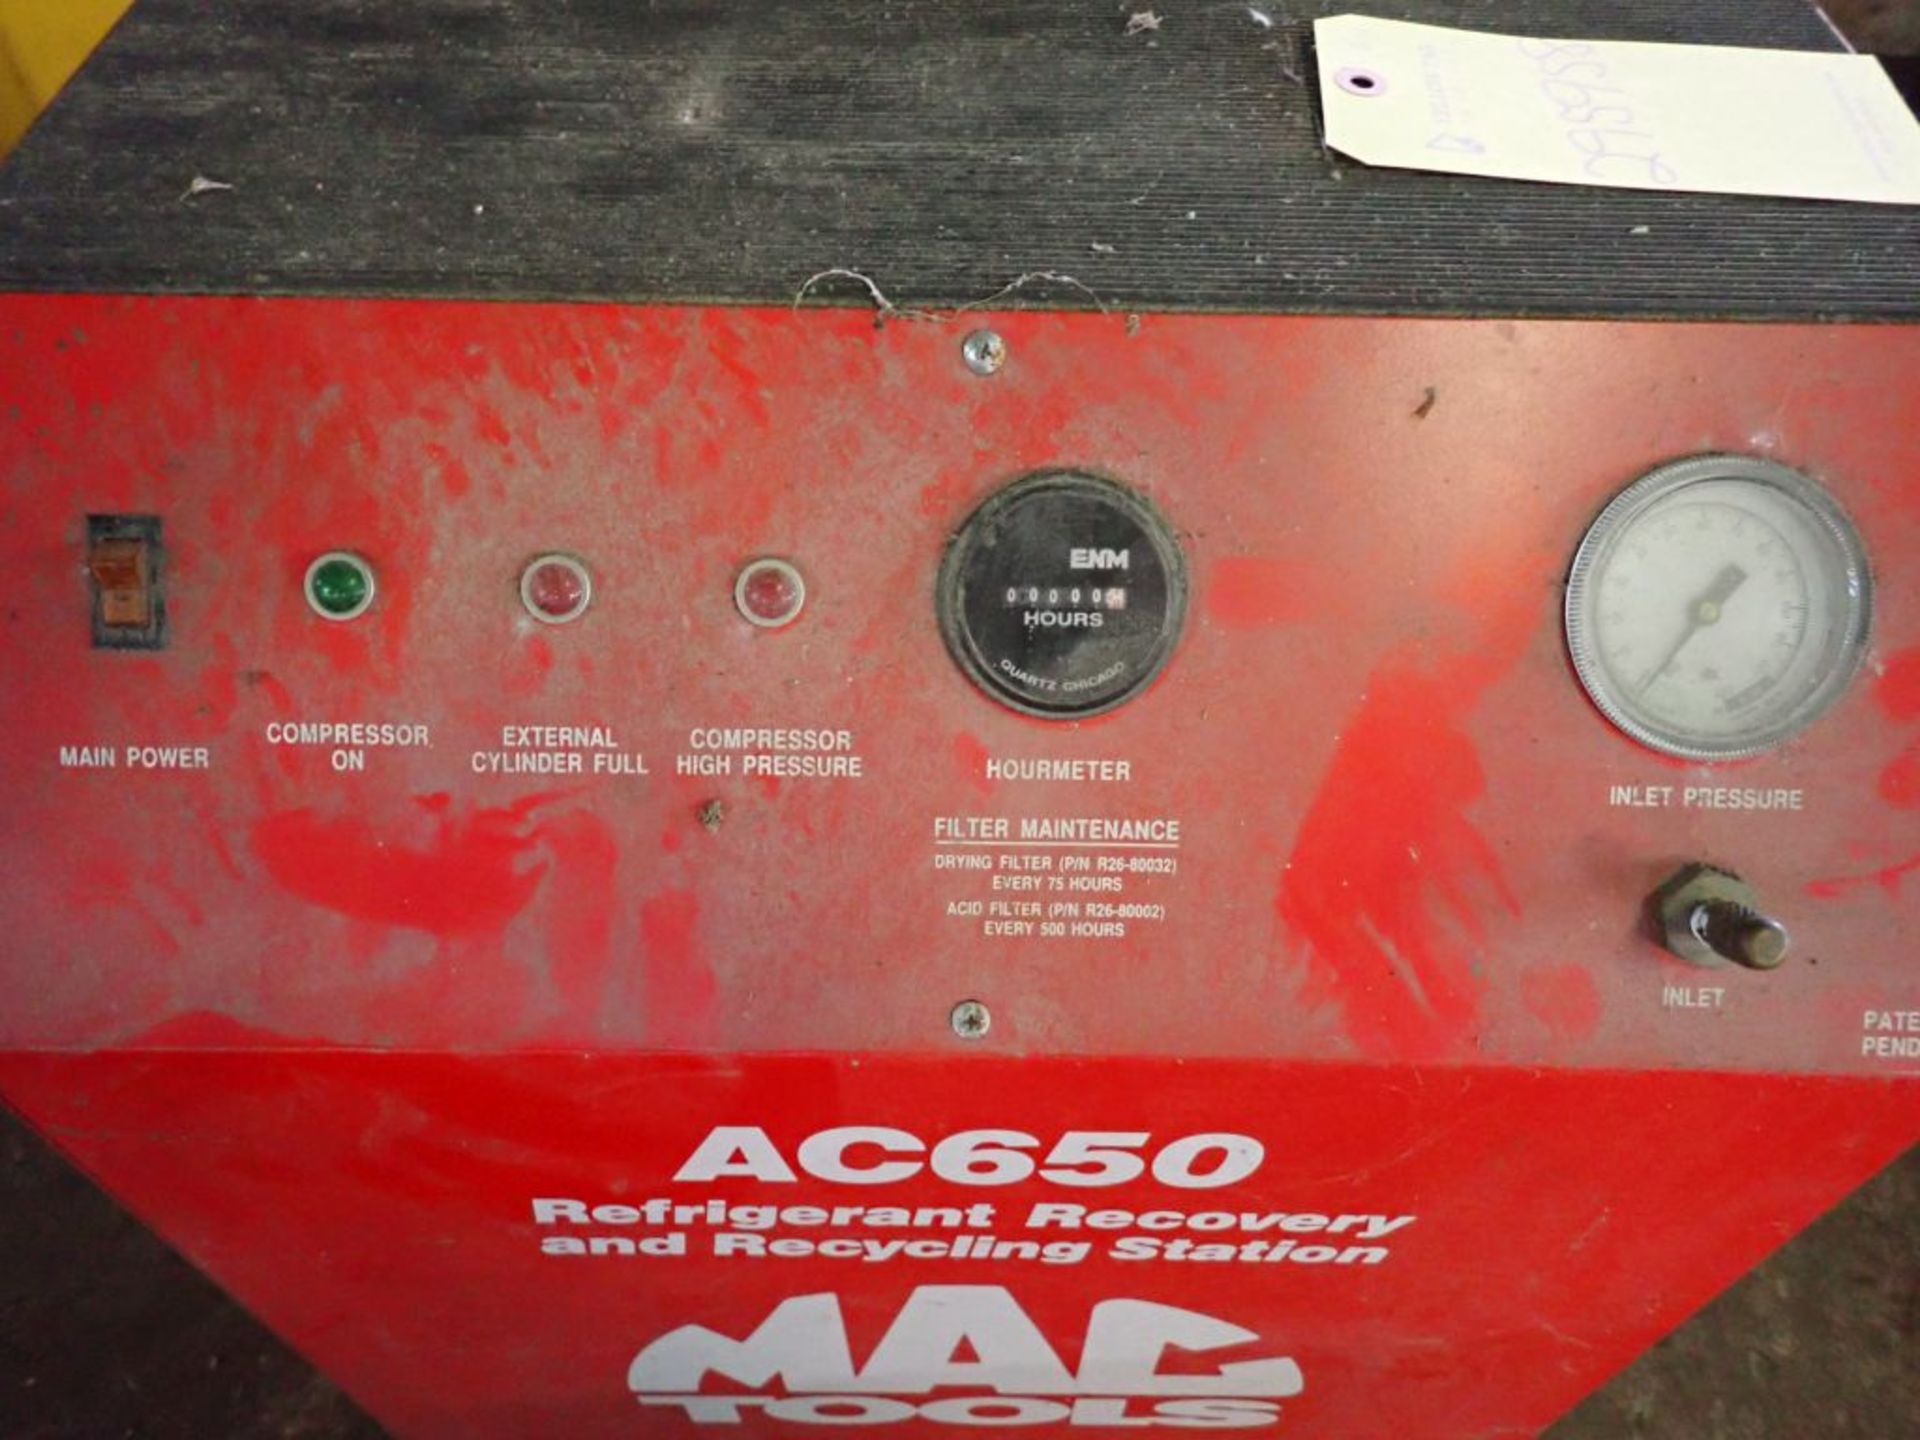 Mac Tools AC 650 Rolling Refrigerant Recovery & Recycling Station - Image 2 of 12